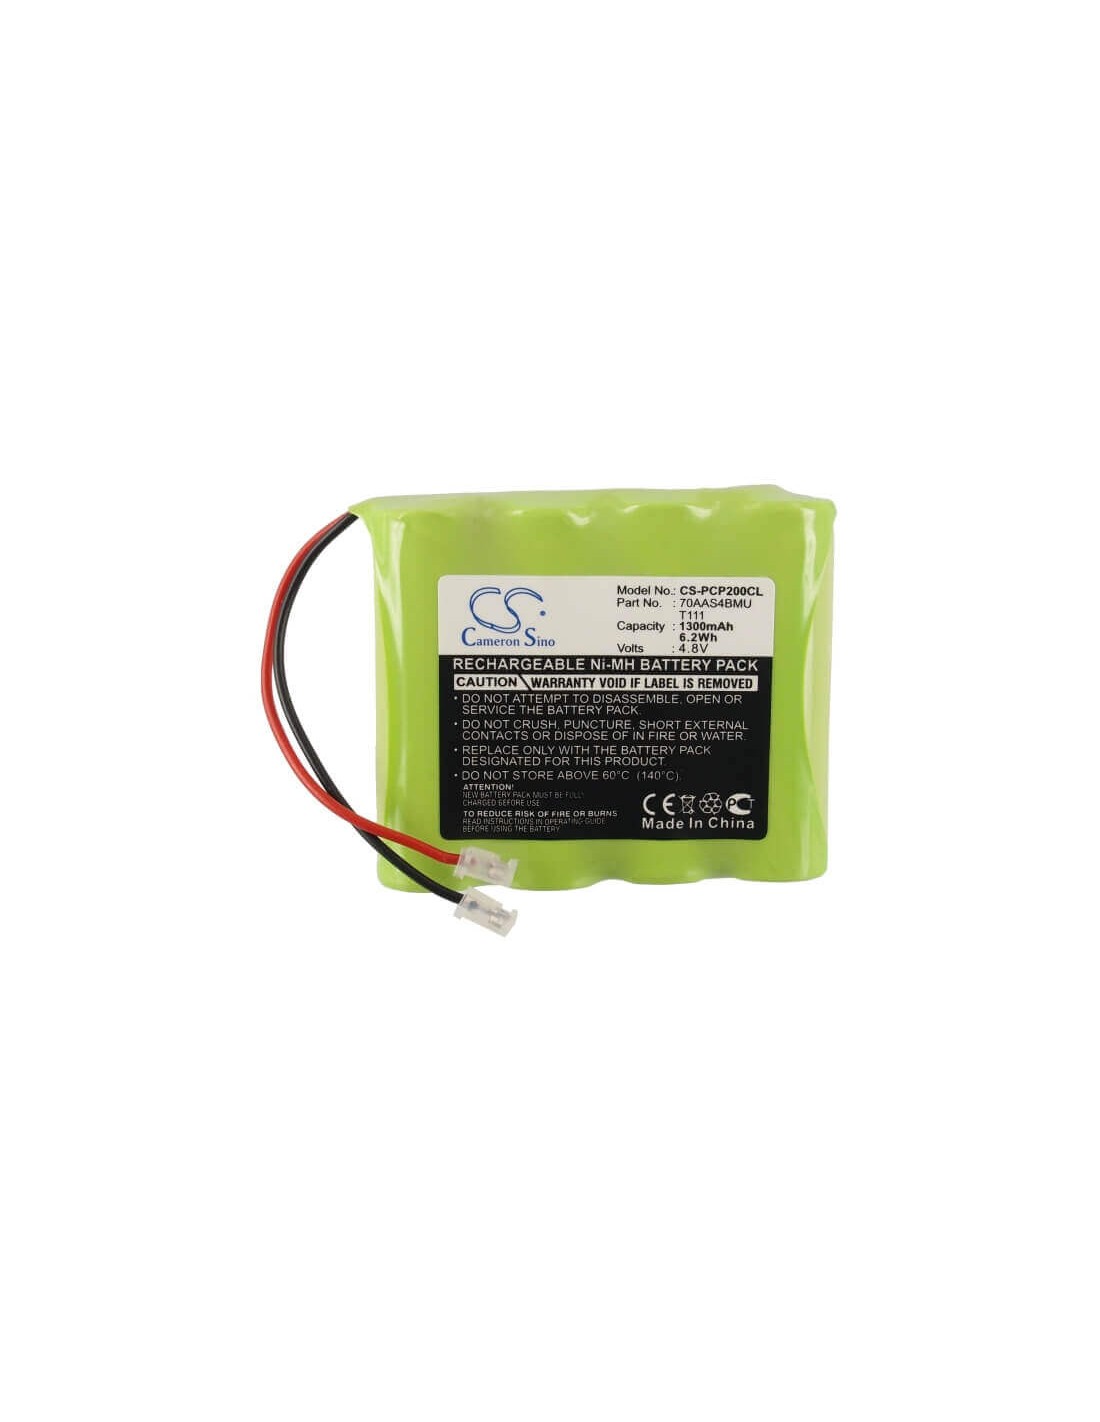 Battery for Cobra, Cp200, Cp200s 4.8V, 1300mAh - 6.24Wh